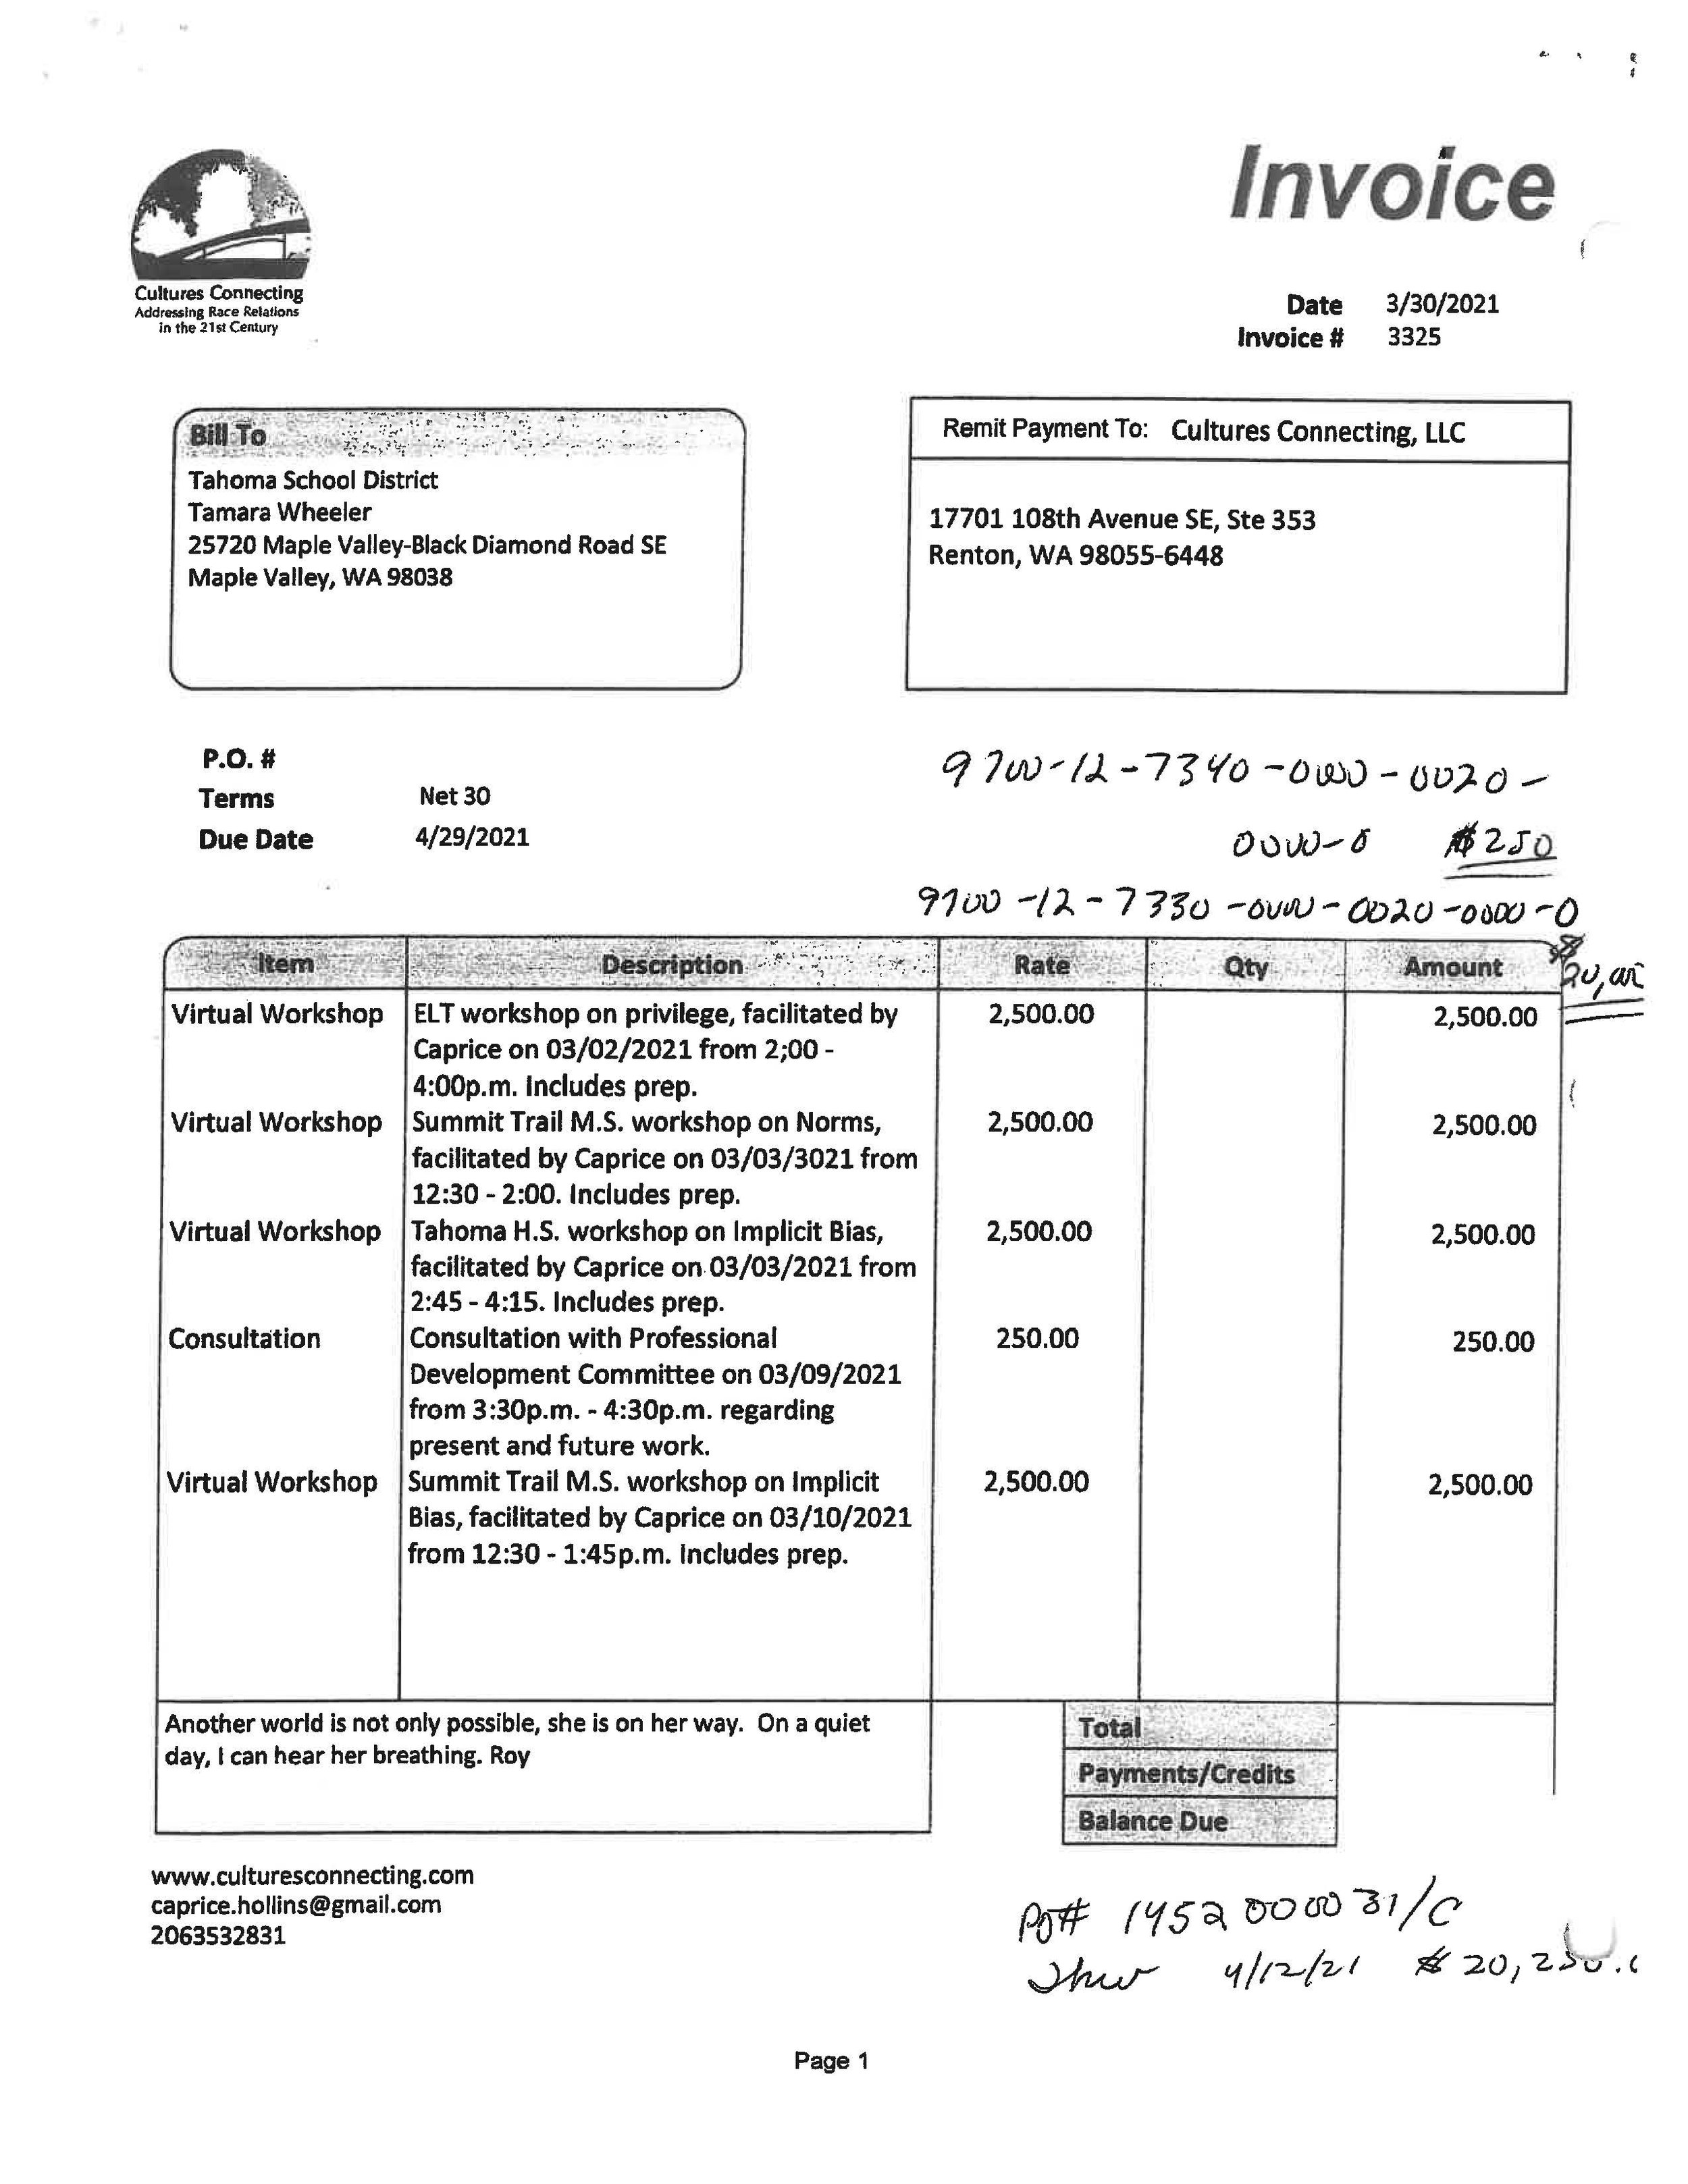 CH invoices_Page_09.jpg